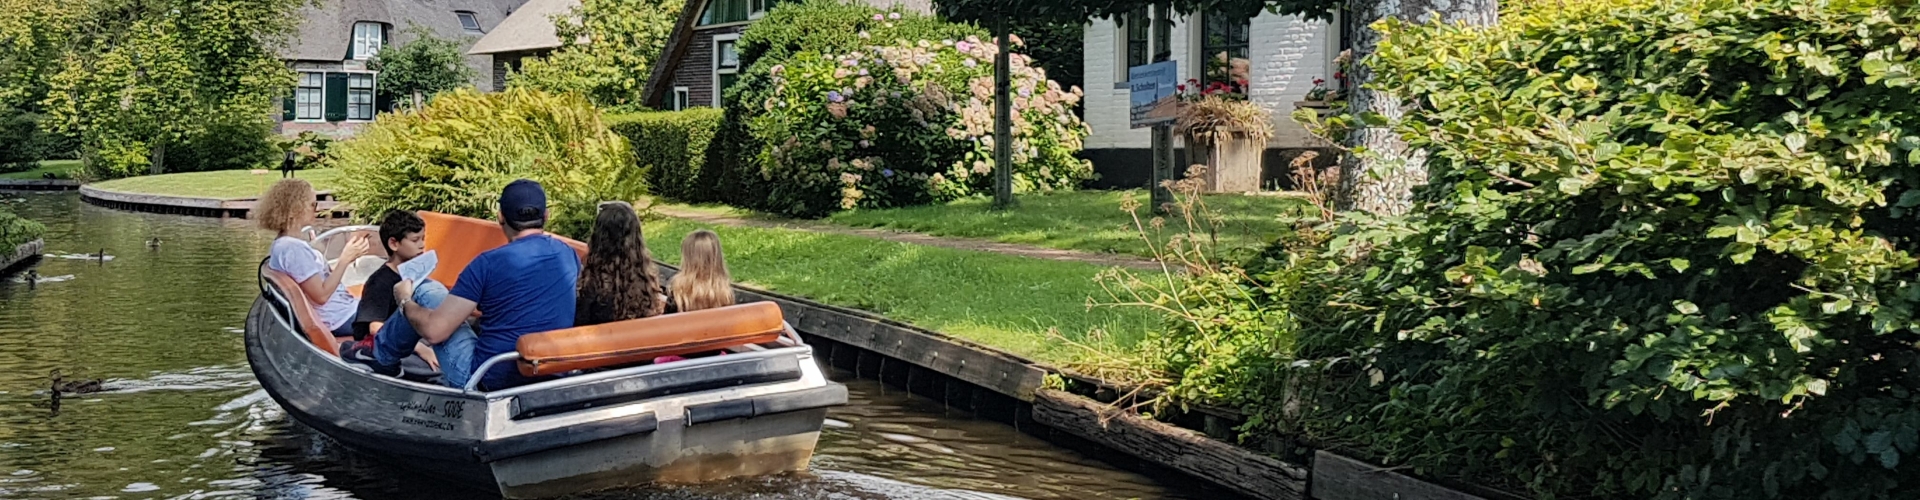 Giethoorn canals and thatched roof houses in Holland